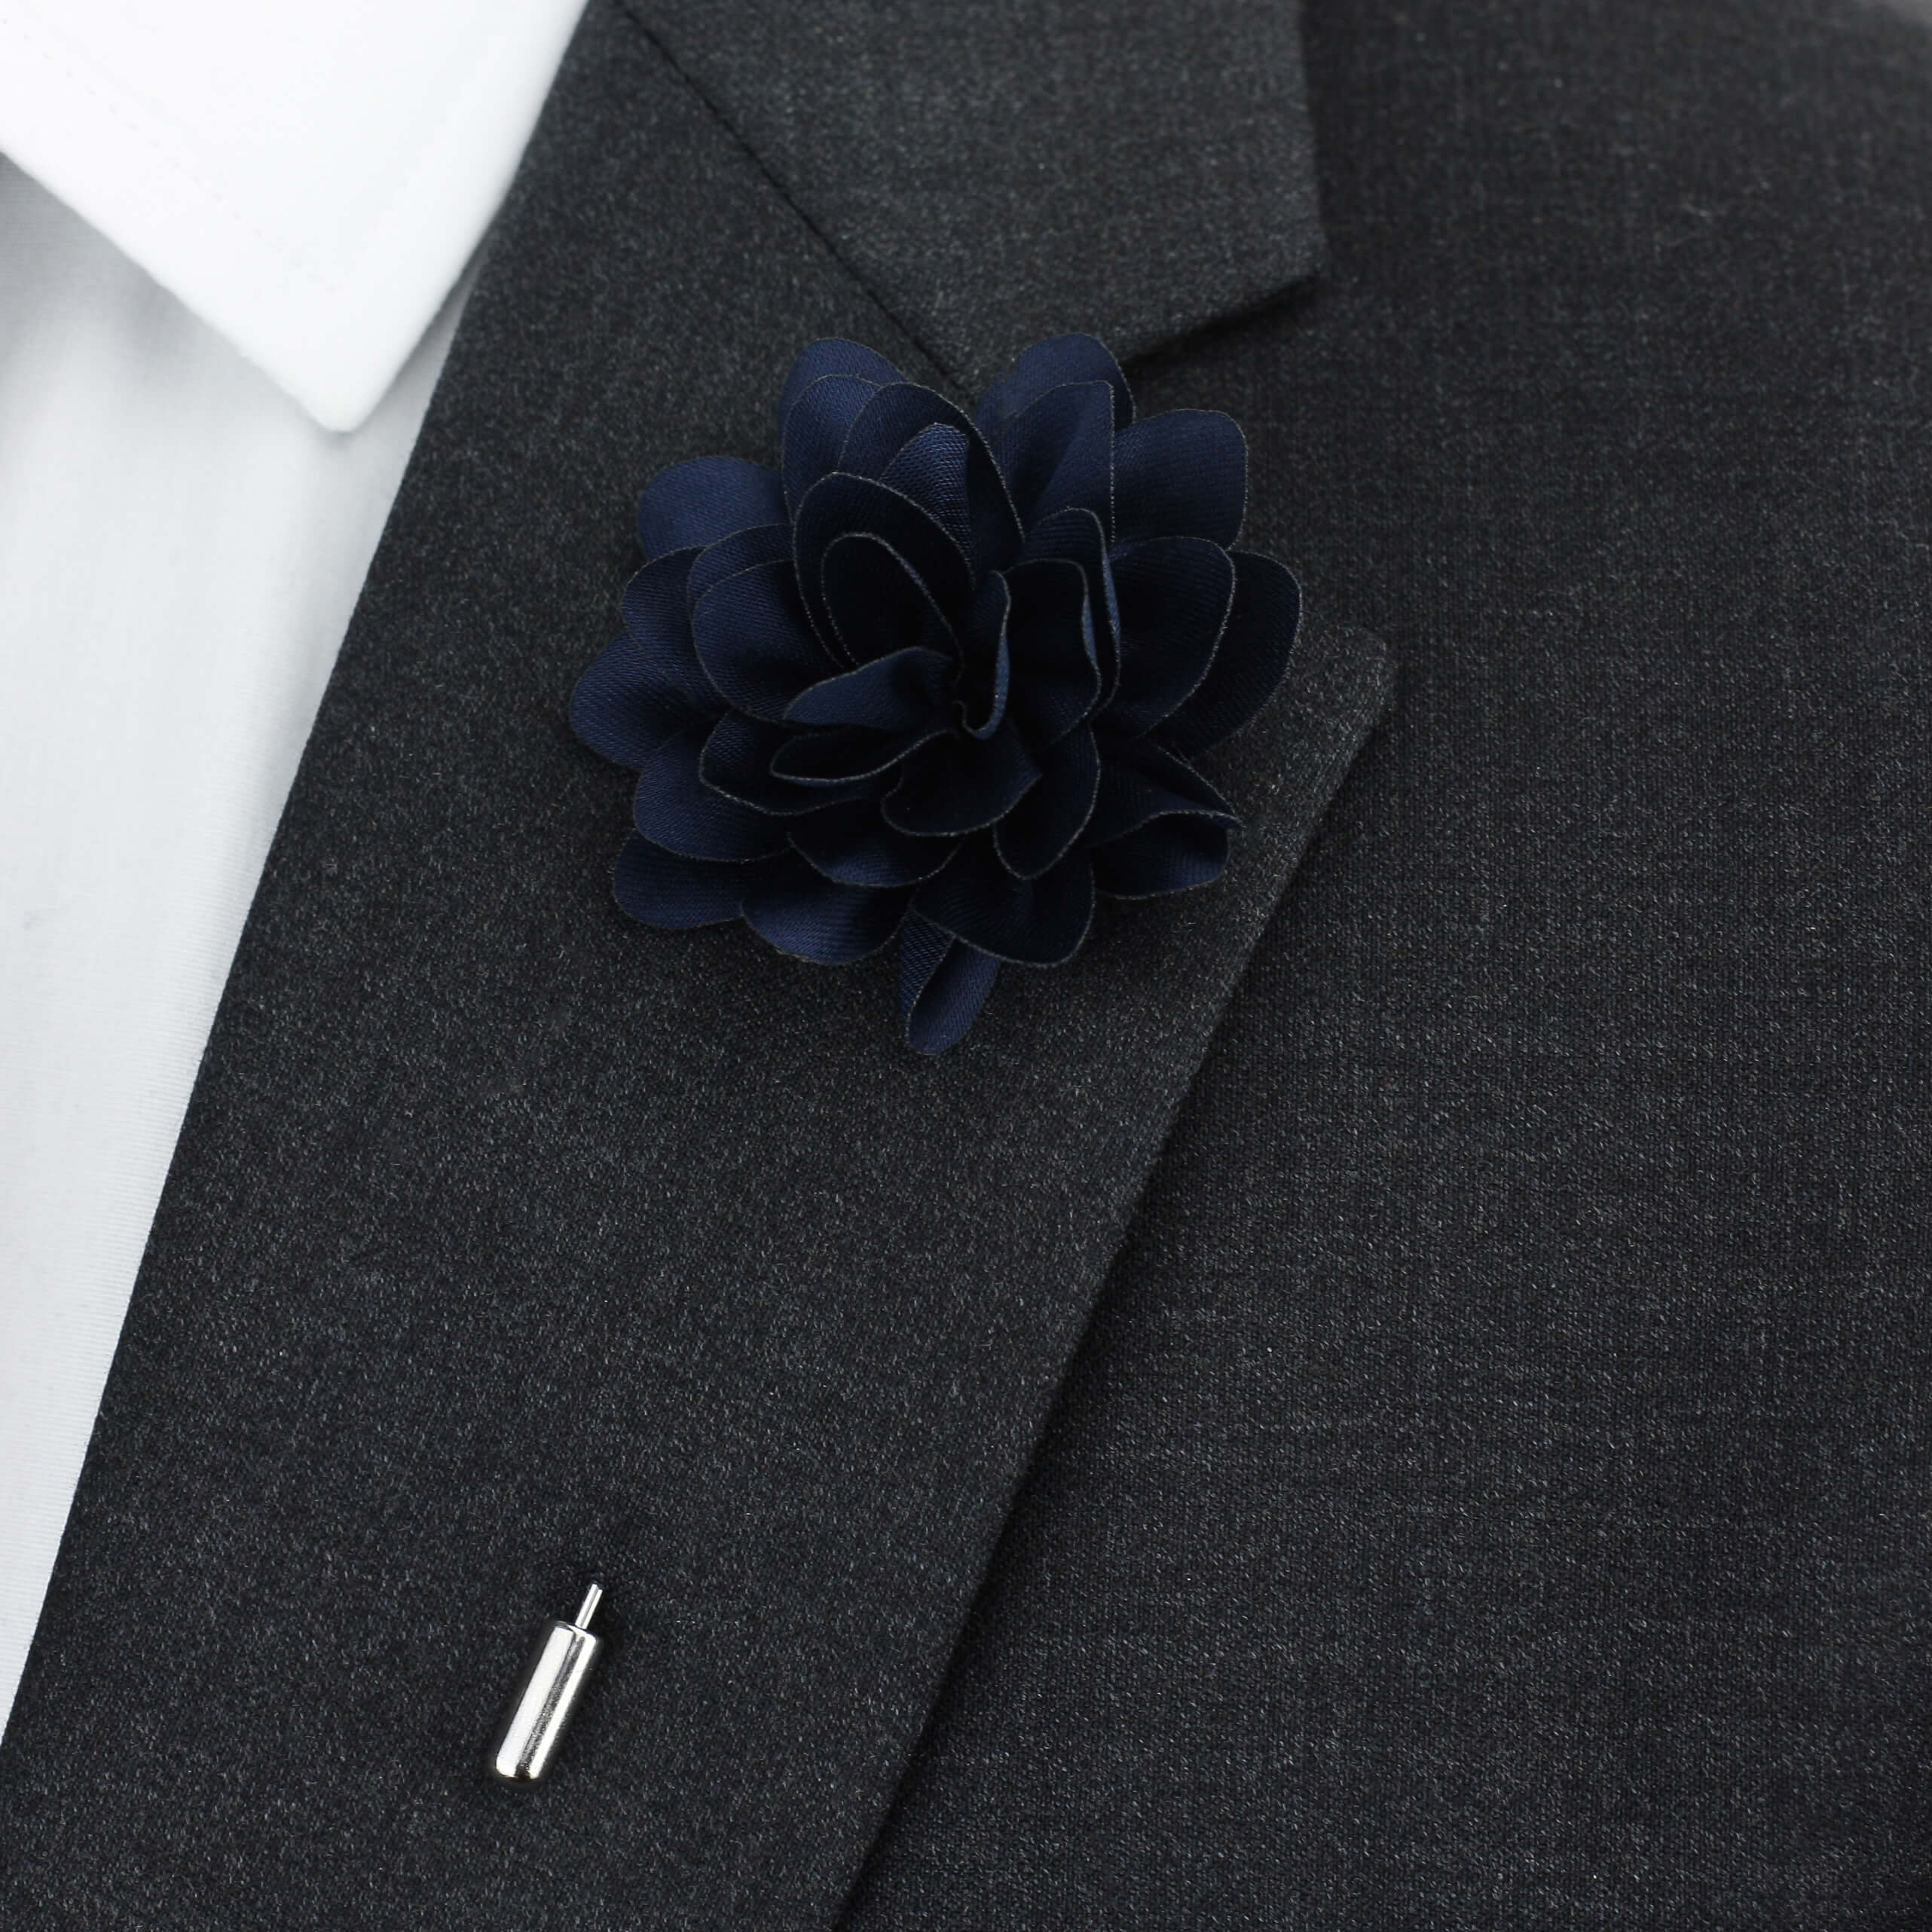 Amour Flower Lapel Pin, Navy - British D'sire